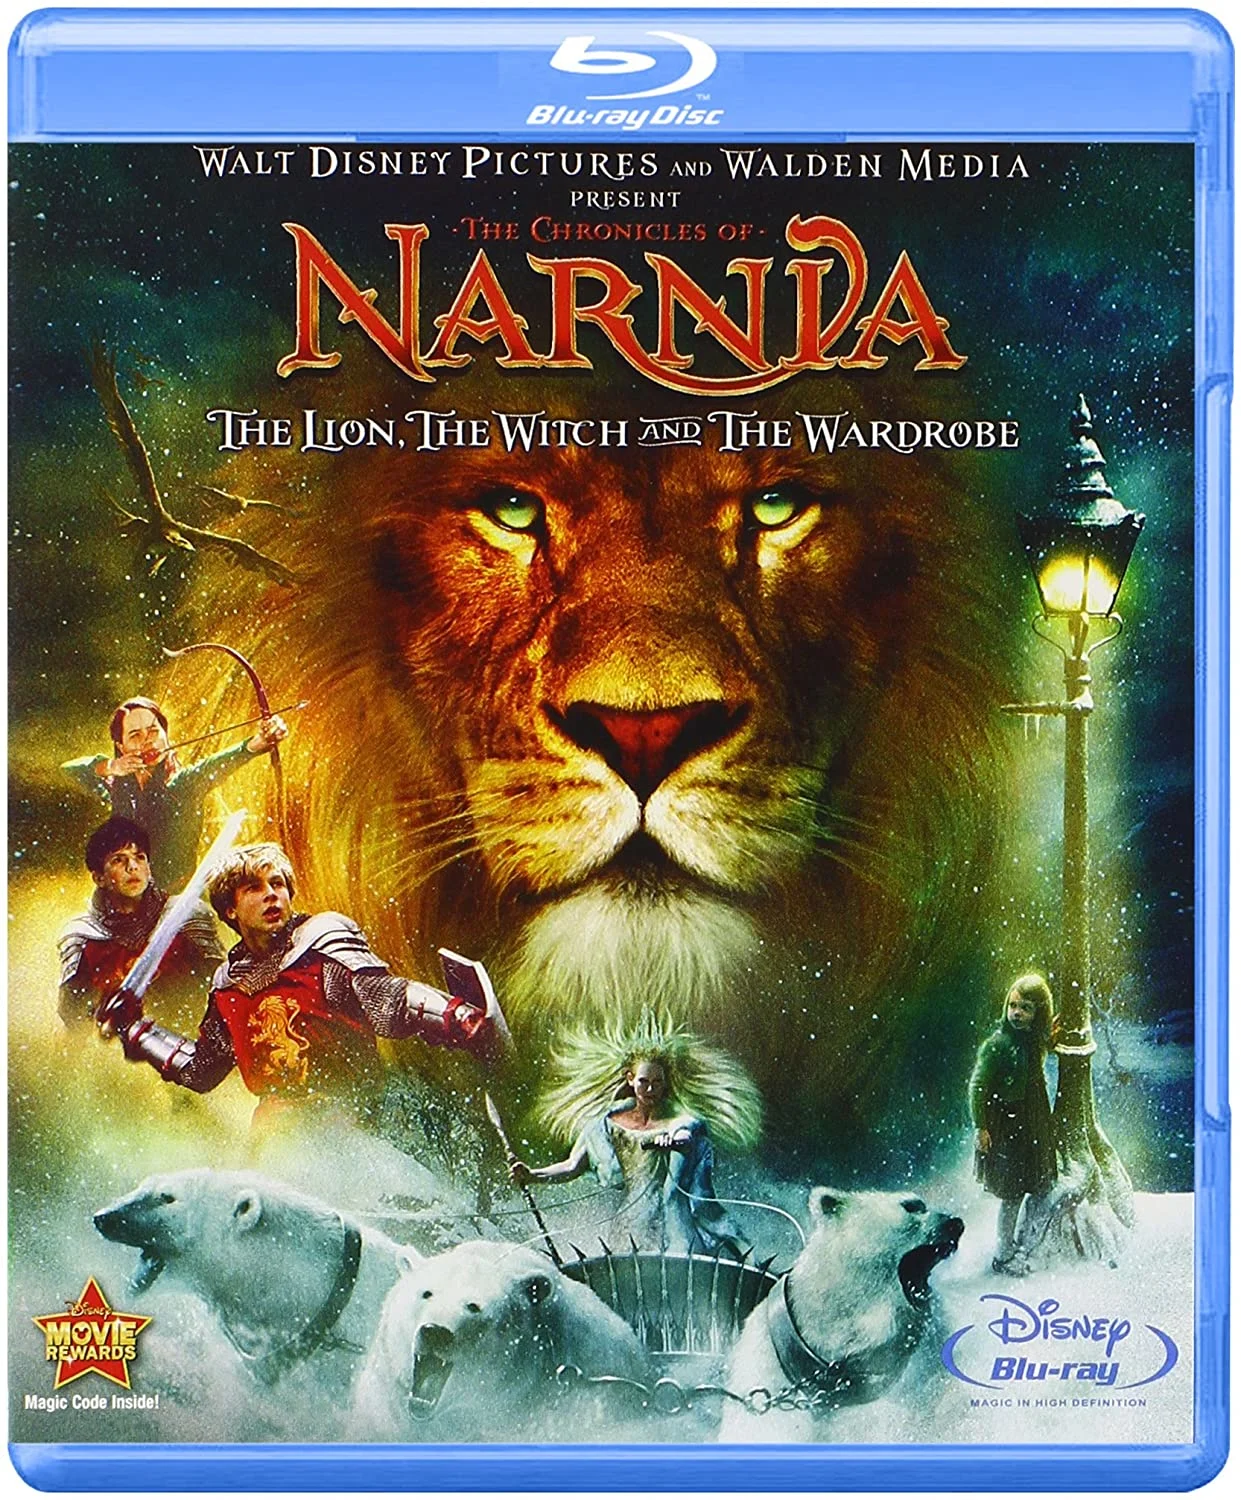 Chronicles of Narnia: The Lion, The Witch And The Wardrobe (Blu-ray) on MovieShack